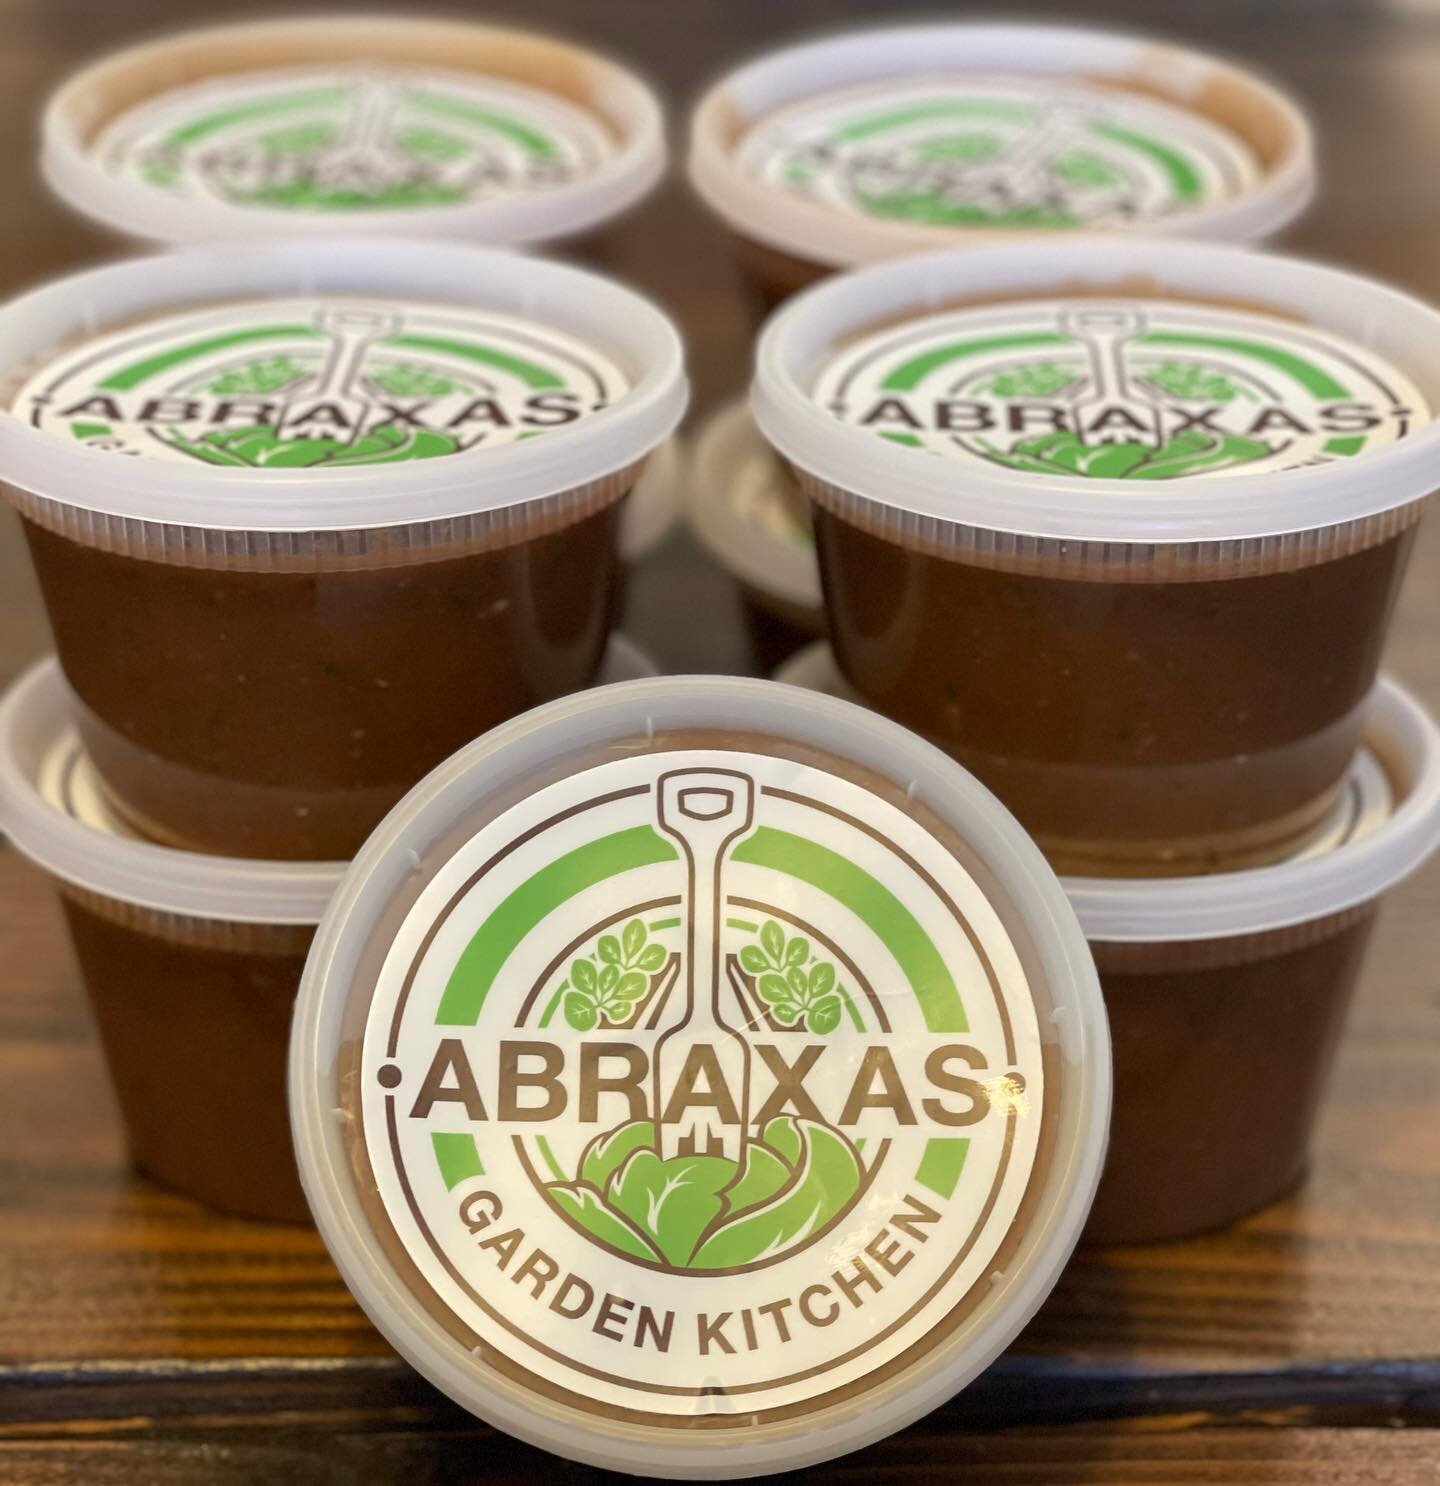 Last week, in just one class period we made 22 pints of this delicious Serrano Salsa &mdash; which sold out in 70 mins at our last flash sale! Shoutout to Joshua (@josh3strada_)for sharing his abuelita&rsquo;s recipe. #abuelitasrecipe  #abraxasgarden